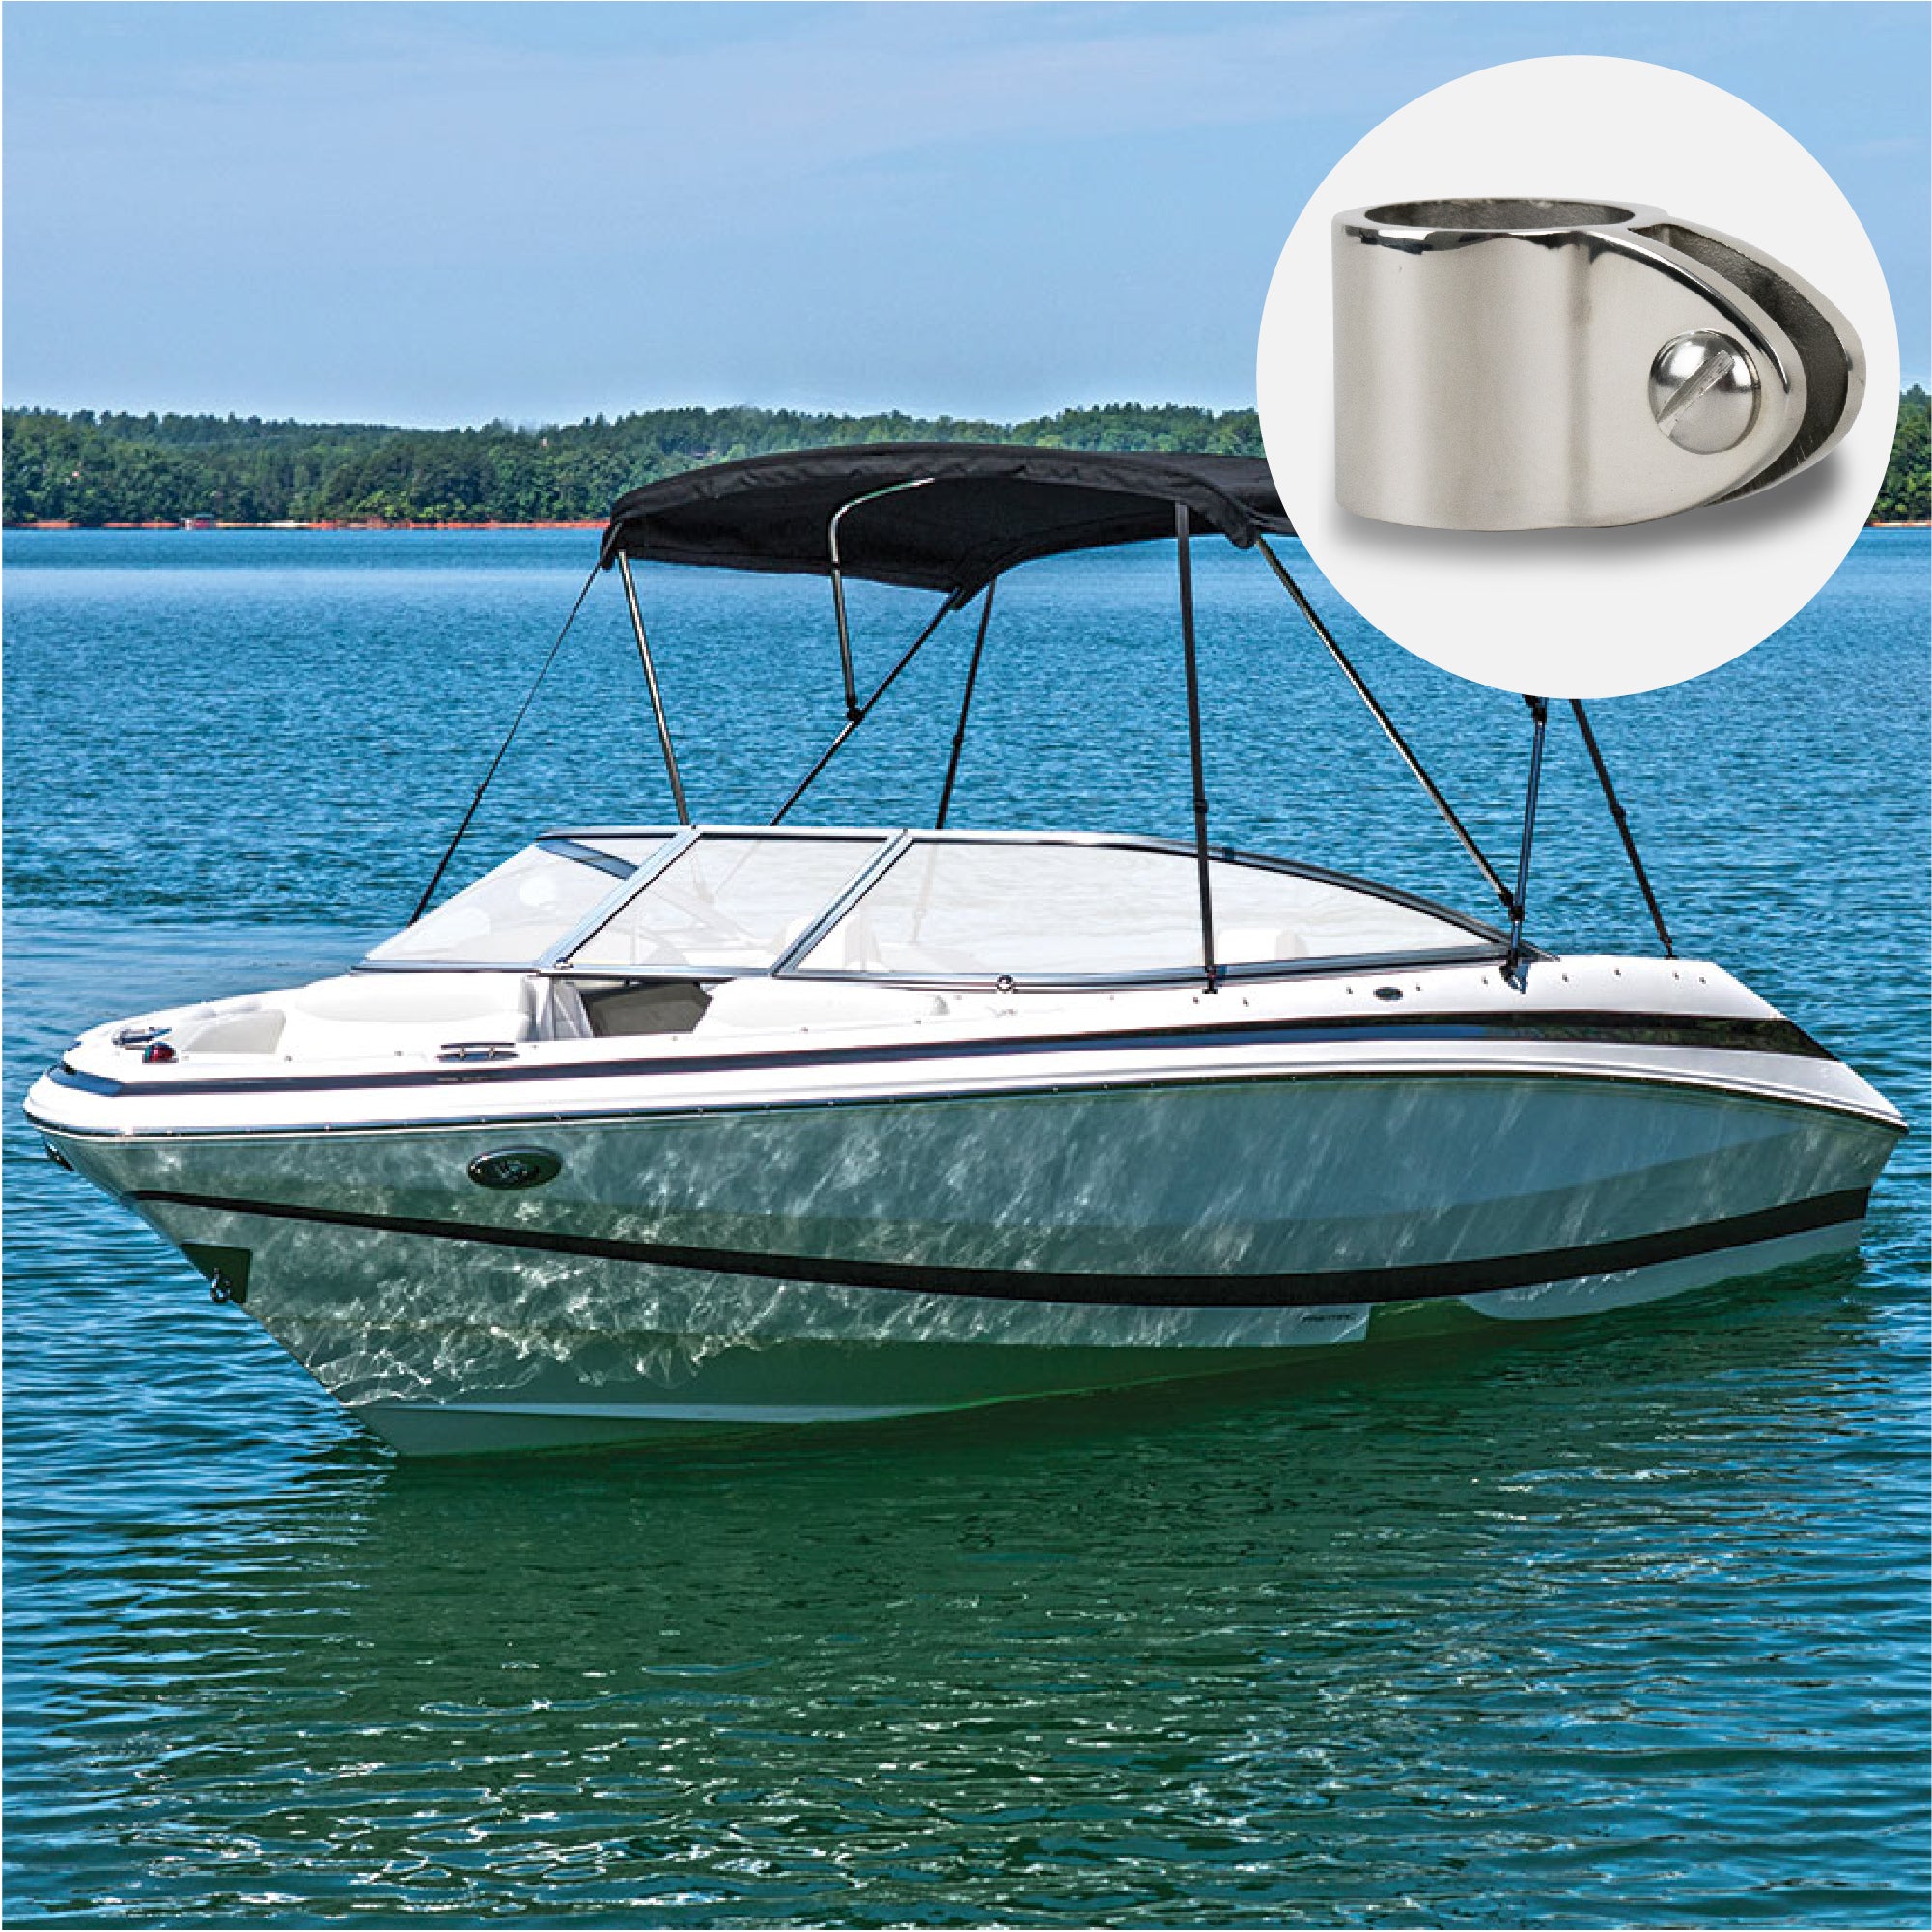 Bimini Top Jaw Slide, 7/8" AISI316 Stainless Steel - FO369